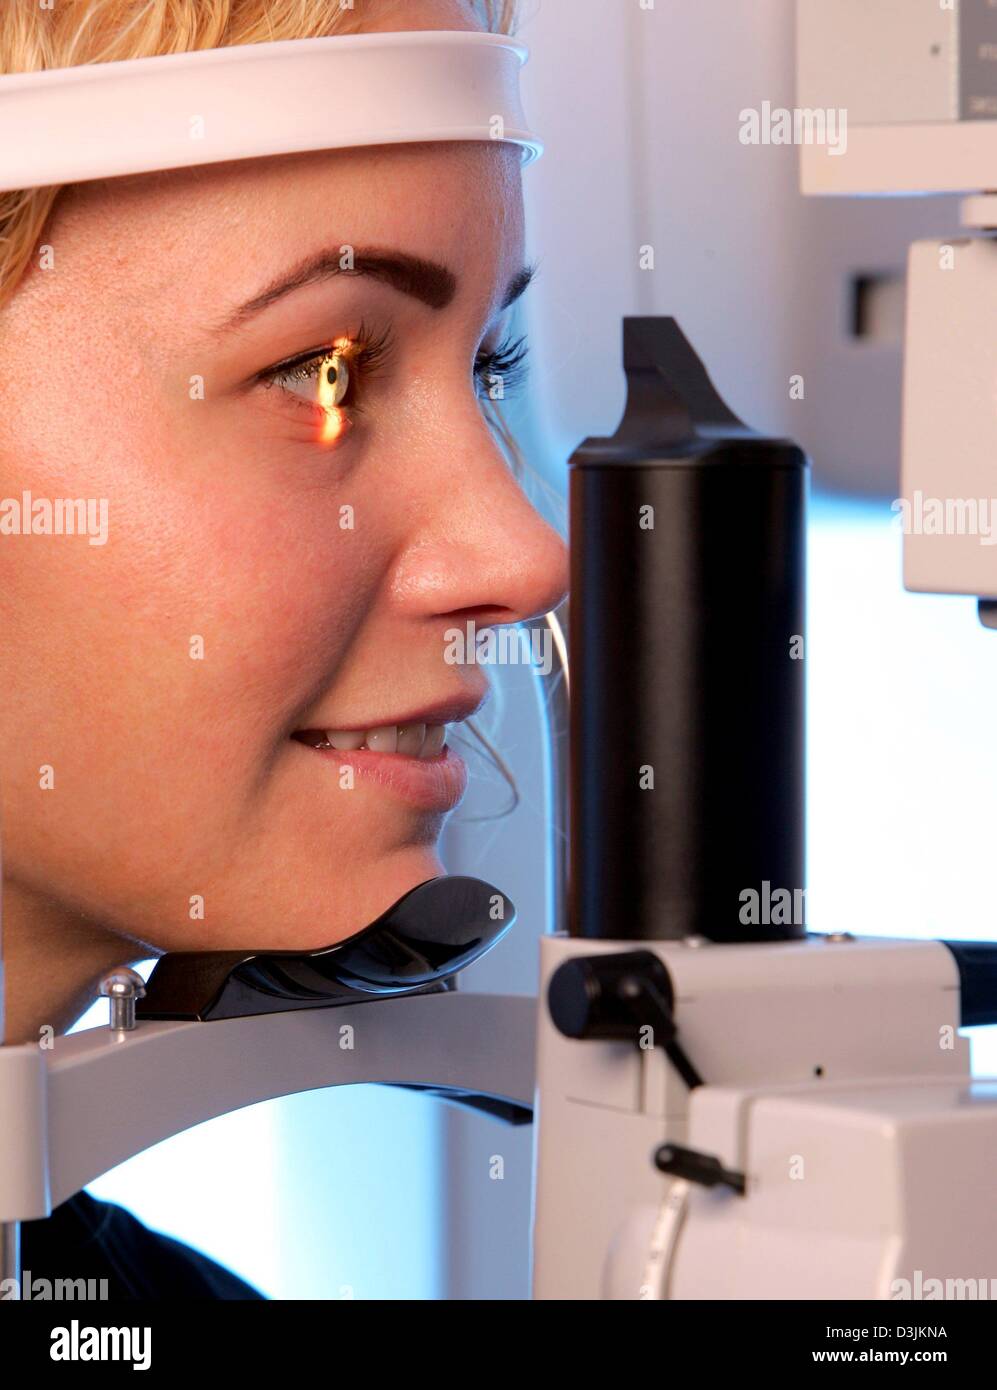 (dpa) - A slit lamp illuminated the eye of a patient during a checkup in for a LASIK eye surgery at the Hohenzollernklinik - Centre for refractive surgery in Muenster, Germany, 27 January 2005. LASIK stands for 'Laser-Assisted In Situ Keratomileusis' and refers to a surgical procedure on the eye with an excimer laser intended to reduce a person's dependency on glasses or contact le Stock Photo